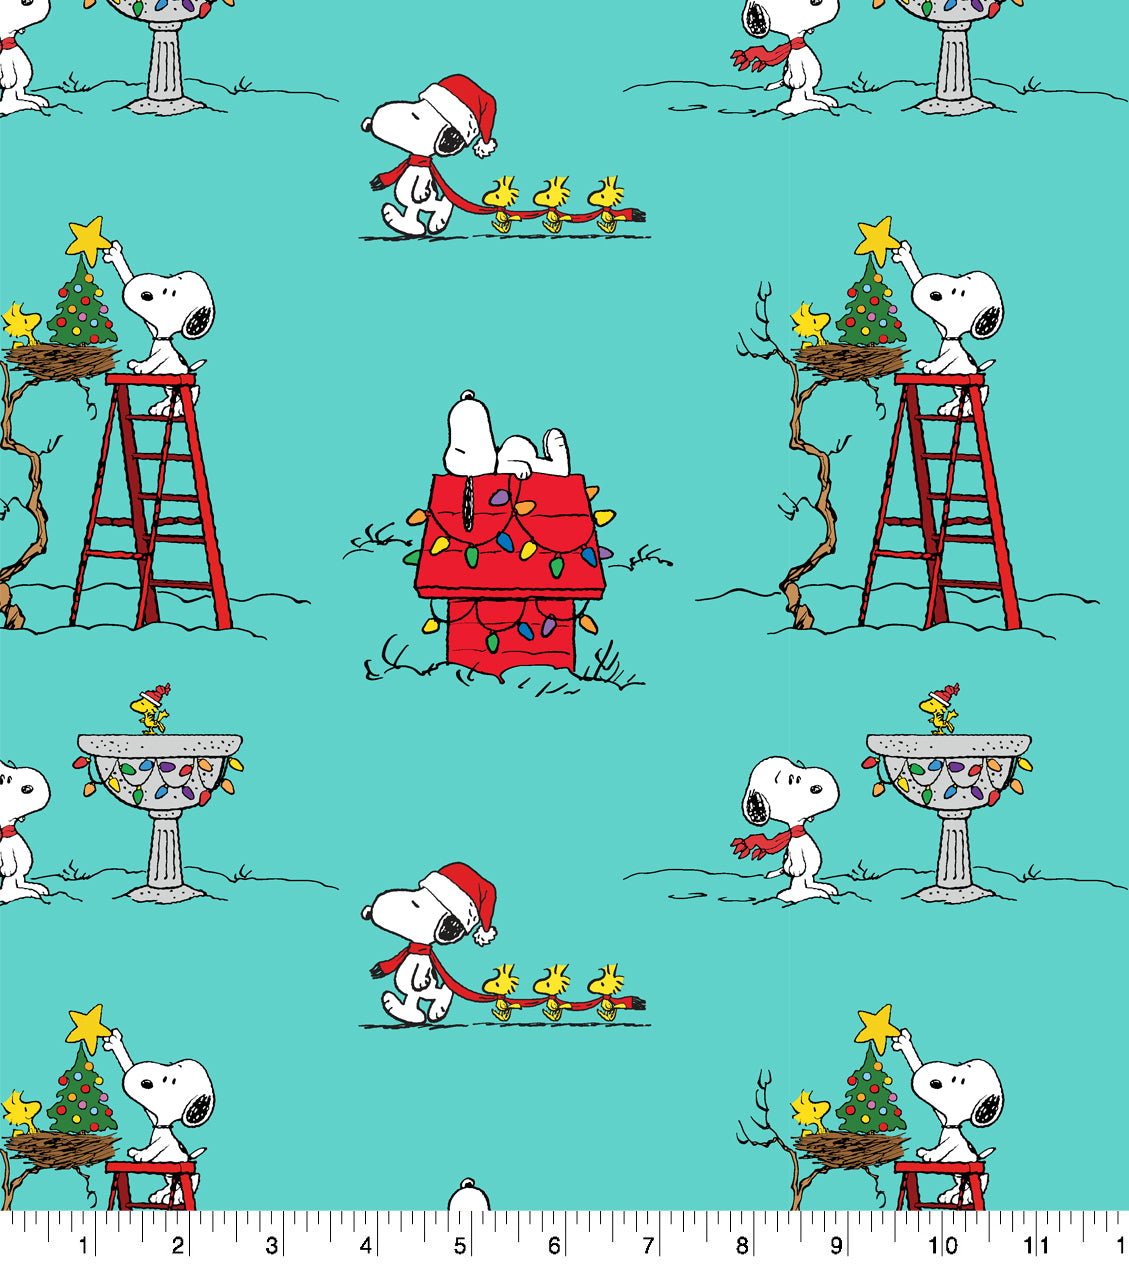 Peanuts Snoopy and Woodstock Christmas Fabric